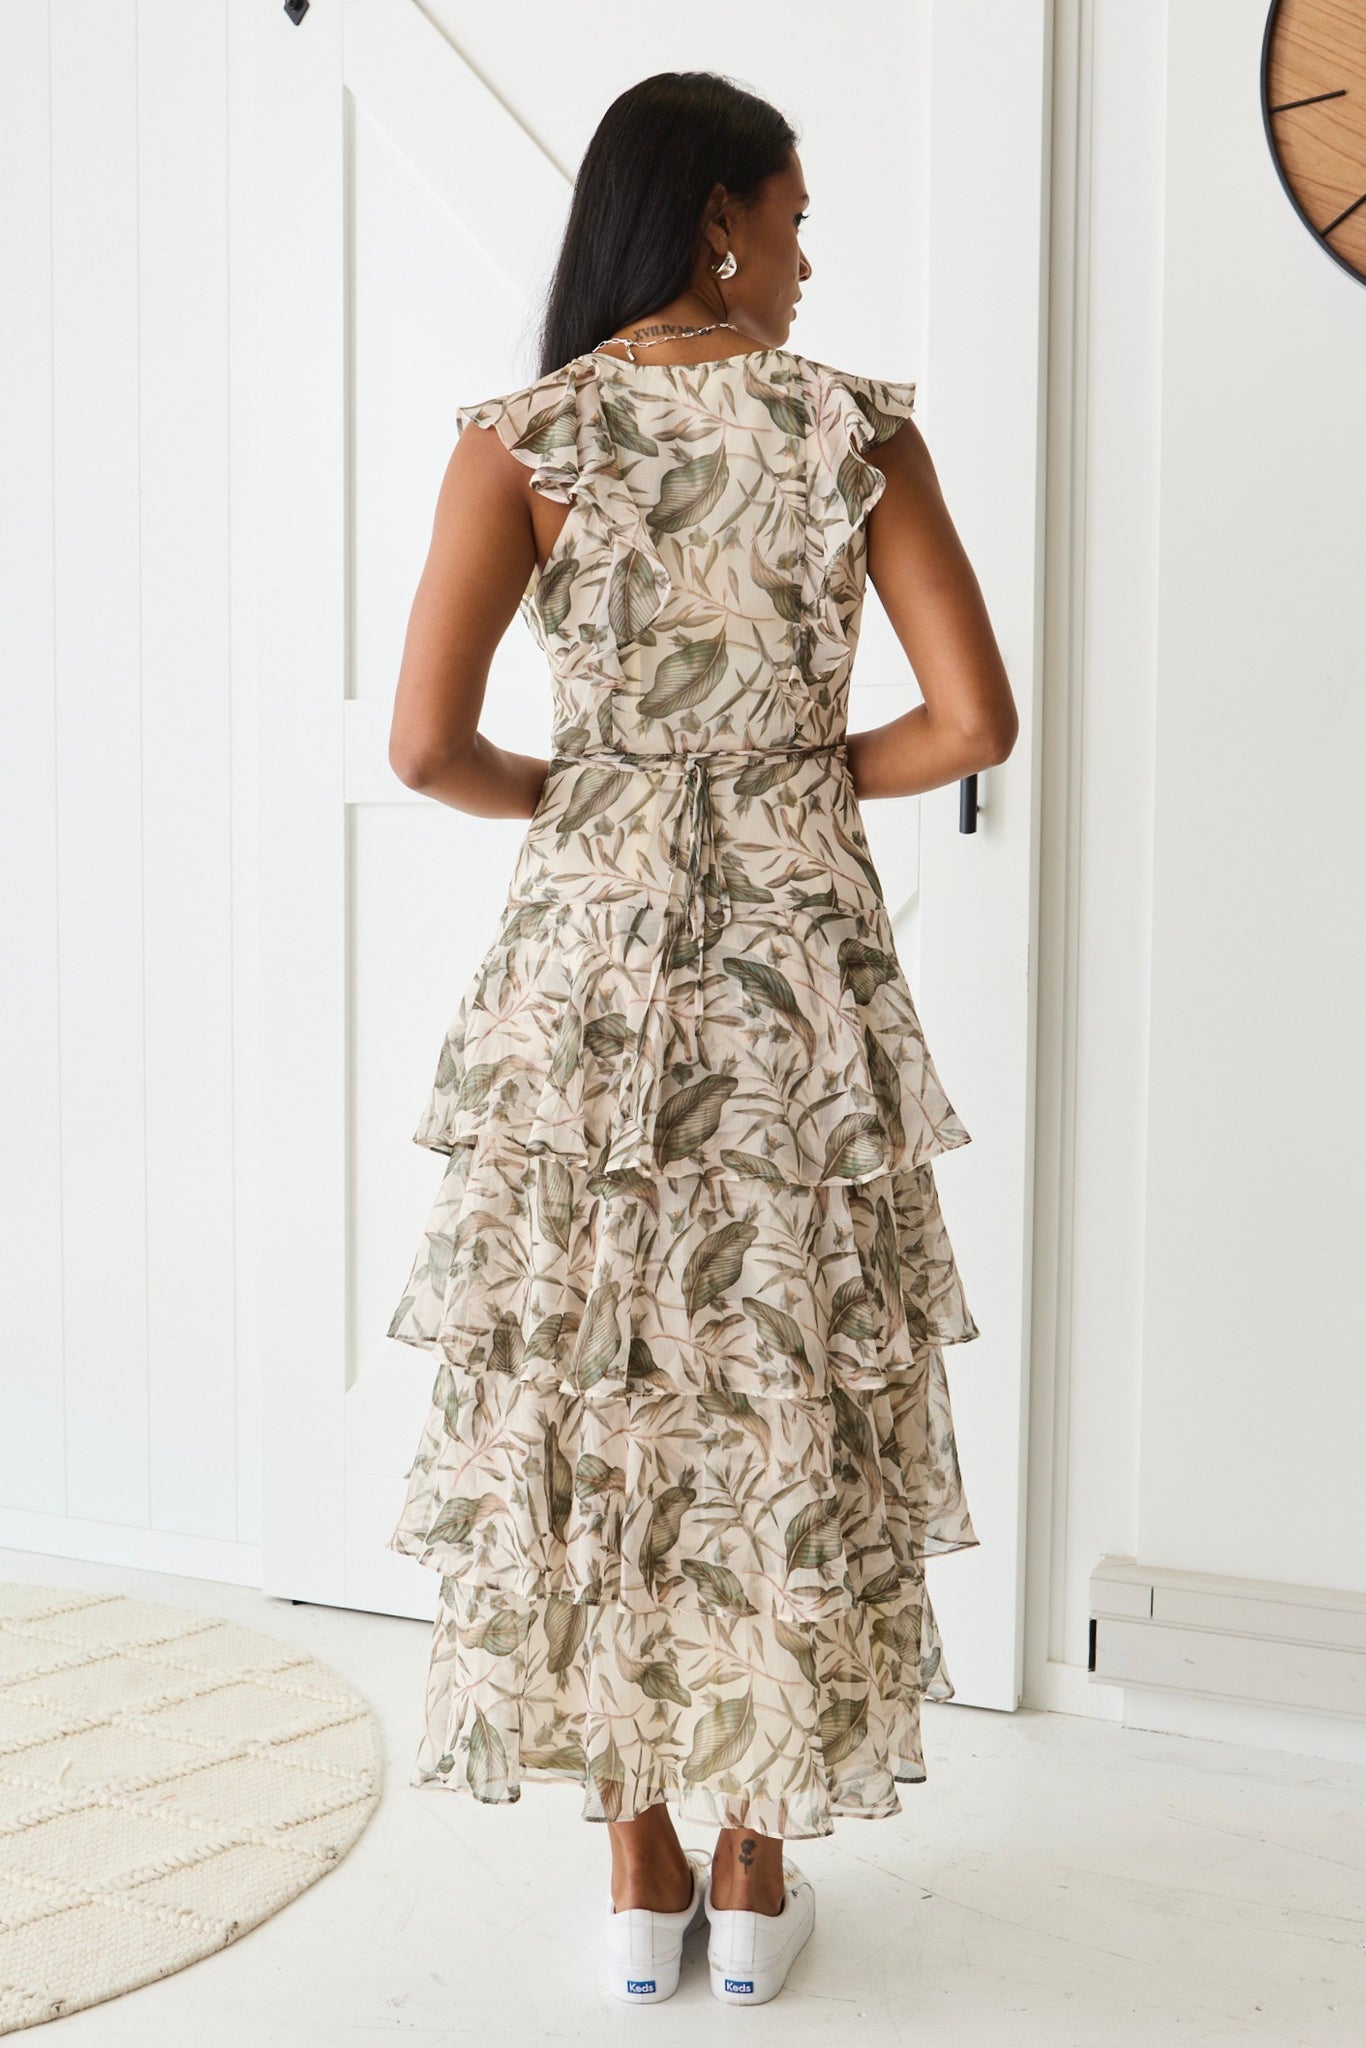 BY ROSA EVERLY IVORY FLORAL FLUTTER SLEEVE TIERED DRESS - THE VOGUE STORE